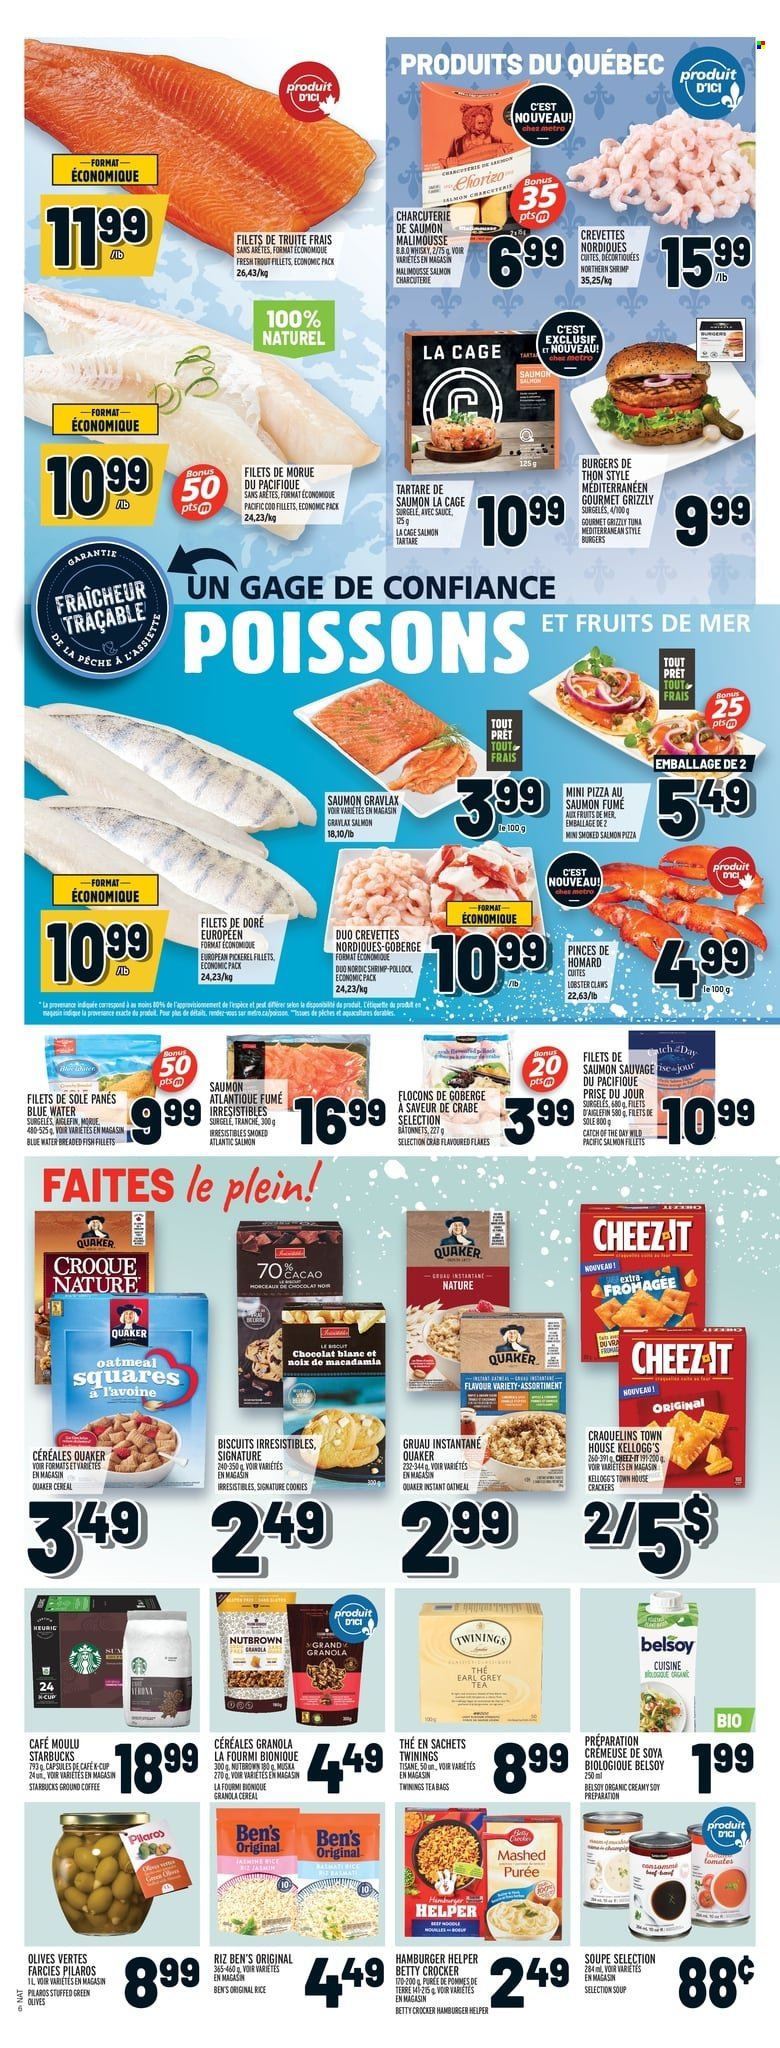 thumbnail - Metro Flyer - November 25, 2021 - December 01, 2021 - Sales products - fish fillets, lobster, salmon, salmon fillet, smoked salmon, trout, tuna, pollock, crab, fish, shrimps, walleye, pizza, soup, Quaker, breaded fish, cookies, crackers, Kellogg's, biscuit, Cheez-It, oatmeal, cereals, rice, tea bags, Twinings, coffee, ground coffee, Starbucks, whisky, cup, cage, granola, olives, chorizo. Page 7.